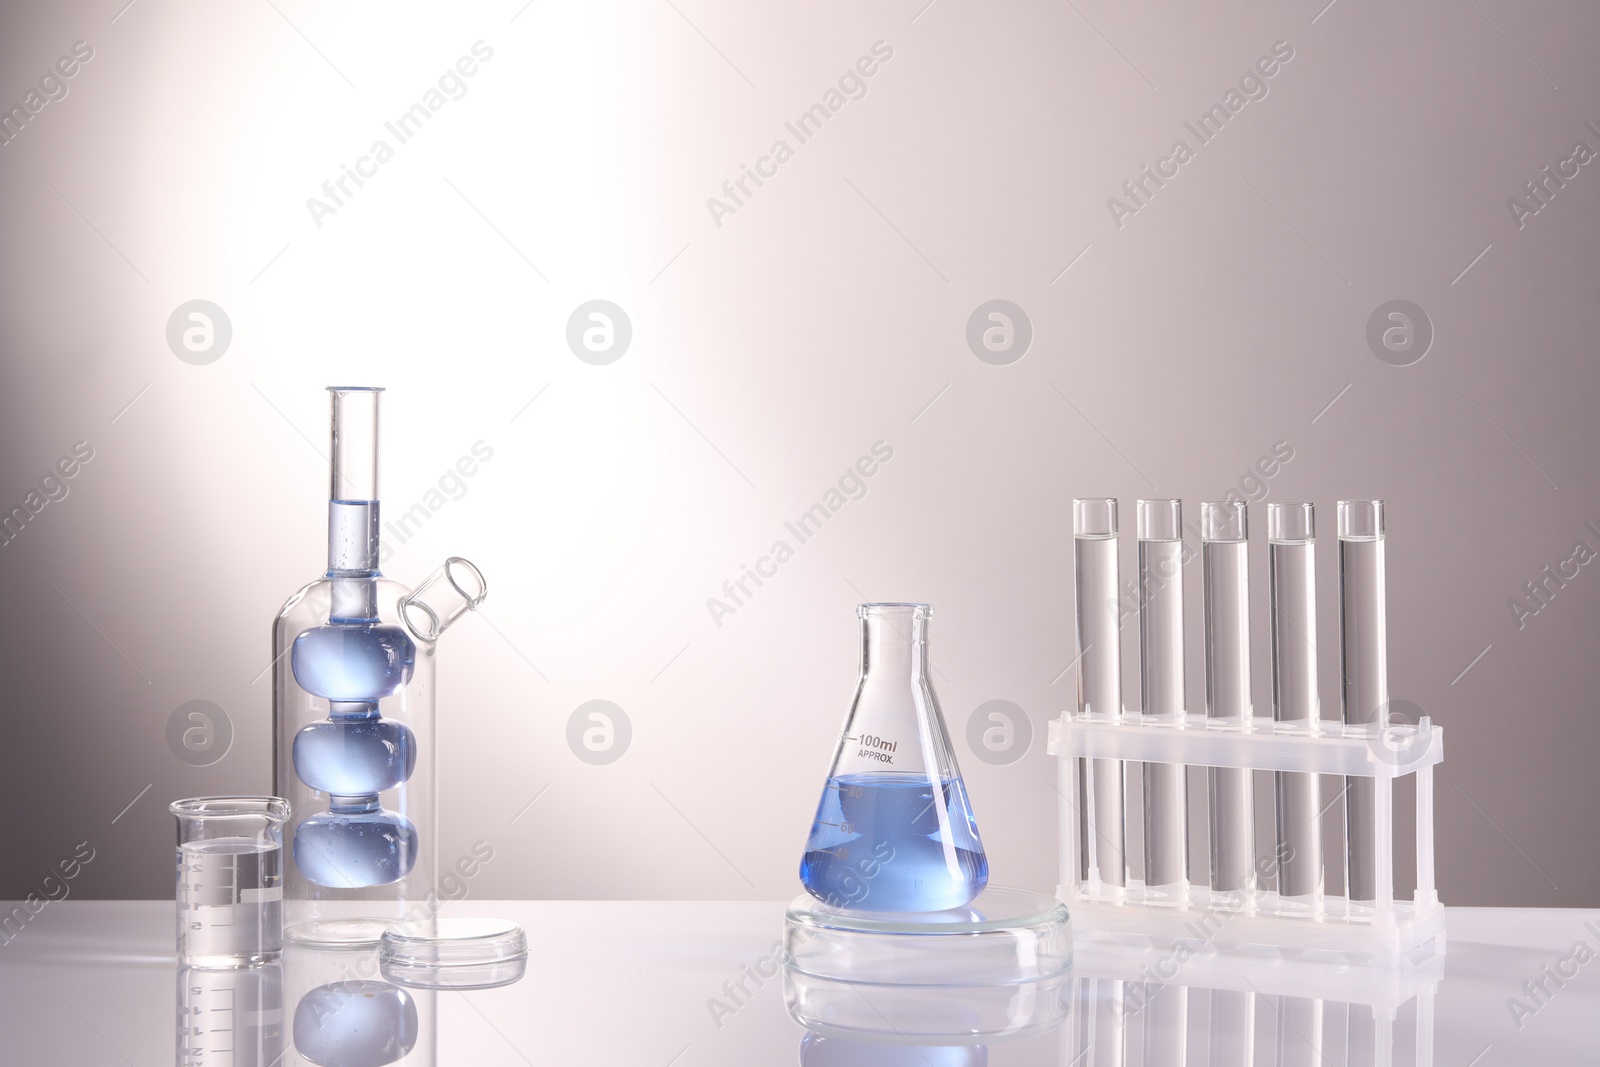 Photo of Laboratory analysis. Different glassware on table against light background